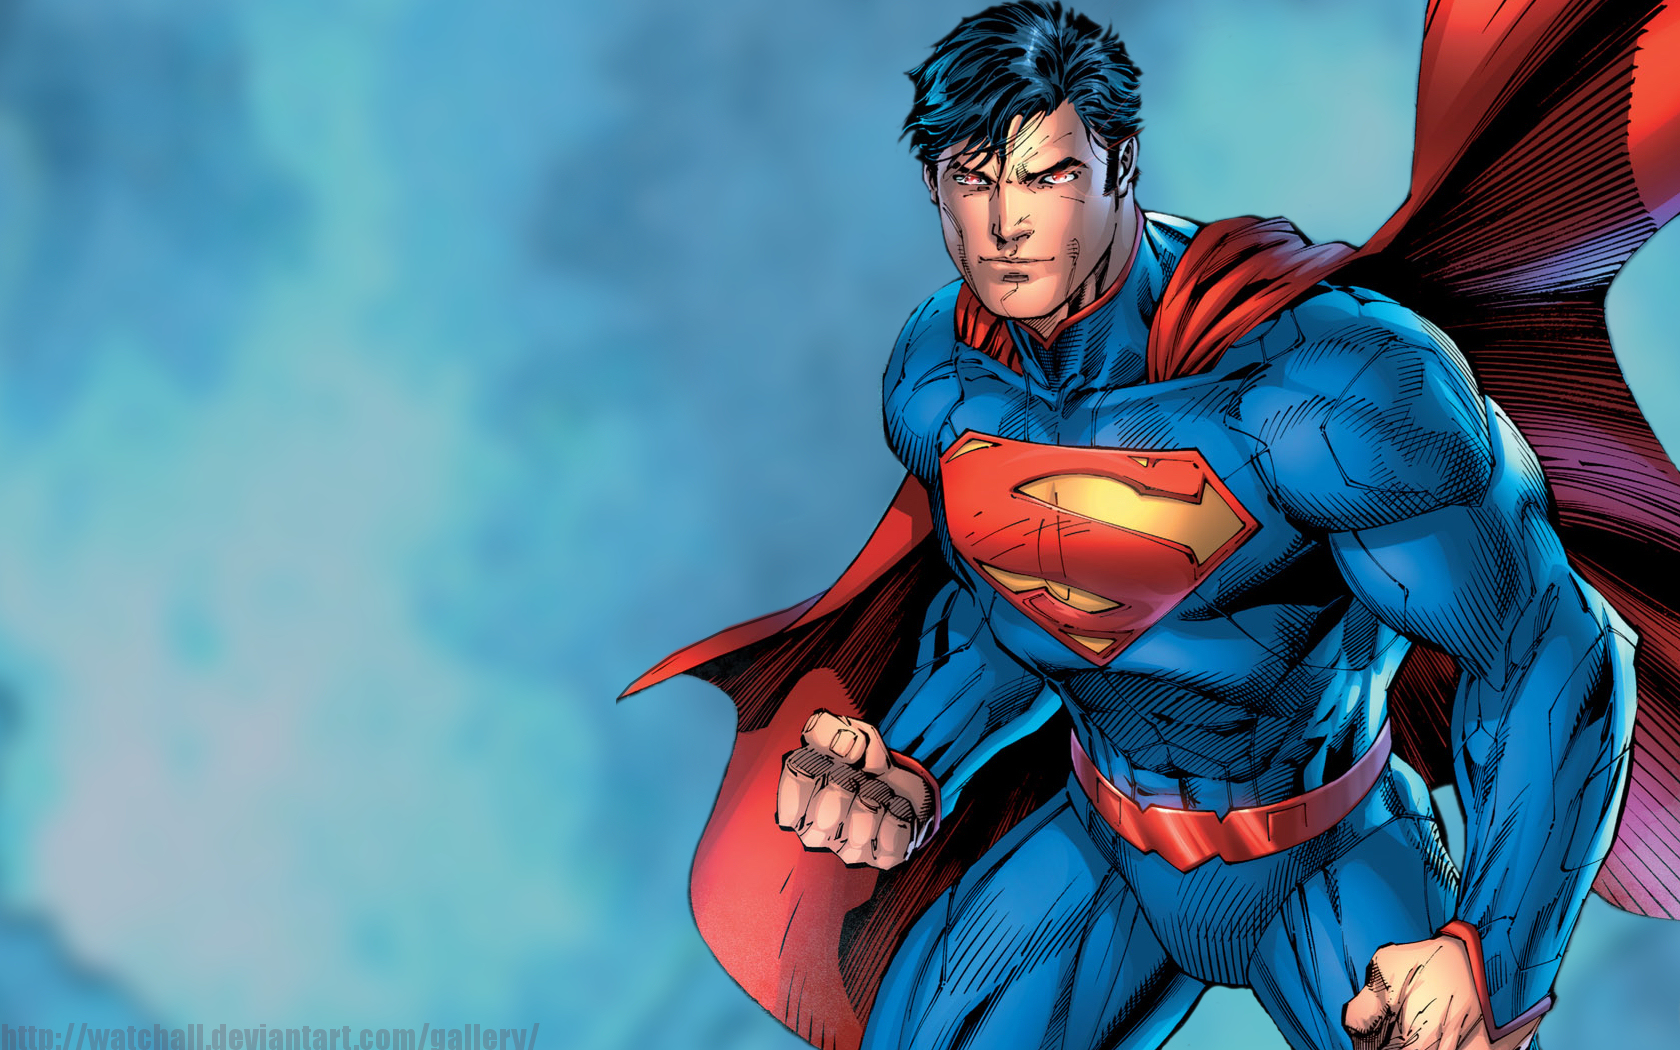 Superman by watchall